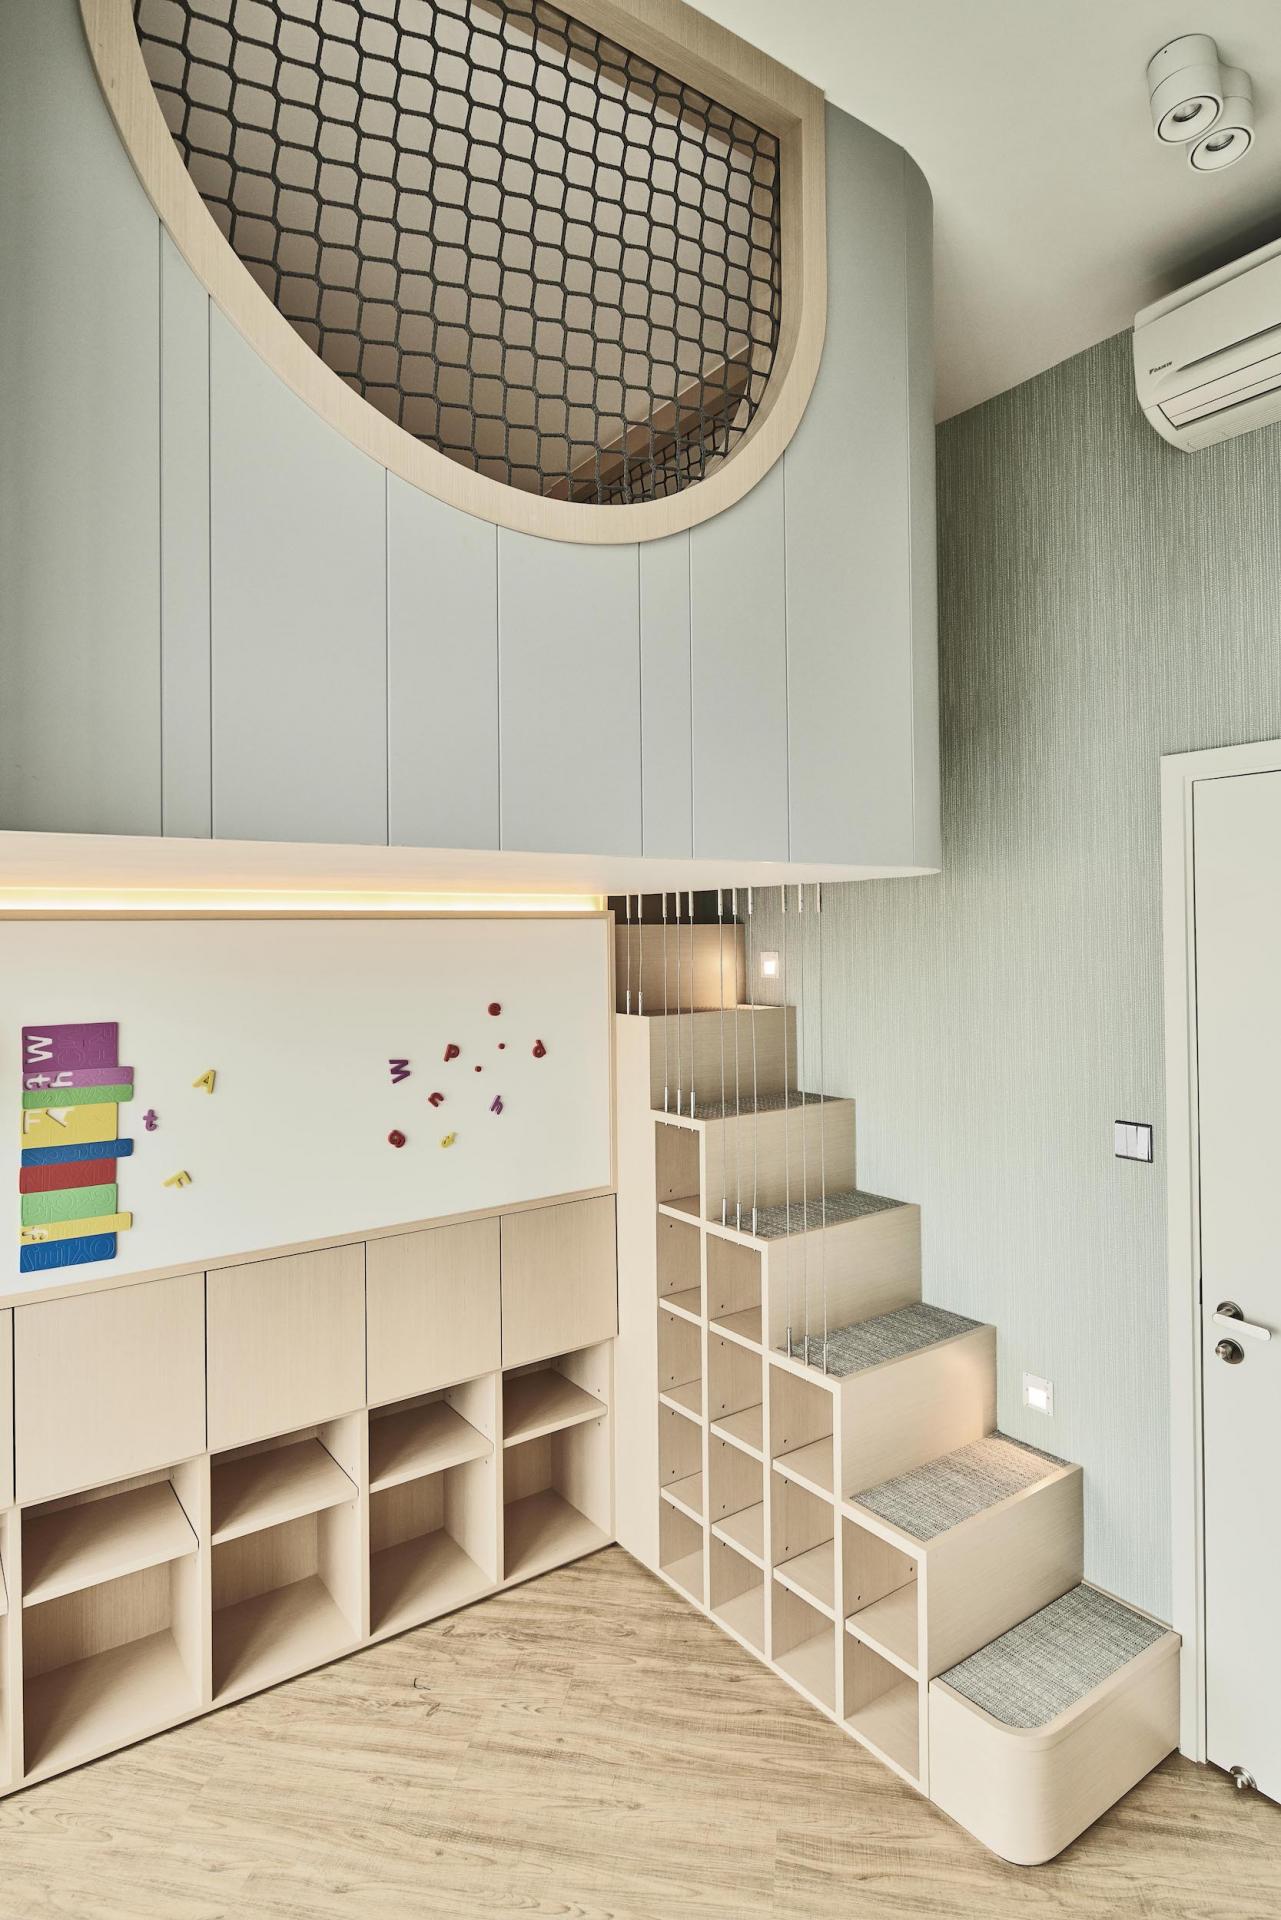 Creating Dreamy Spaces: Mary Wong, Founder of Haven Design's Tips and Tricks for Designing Enchanting Children's Rooms